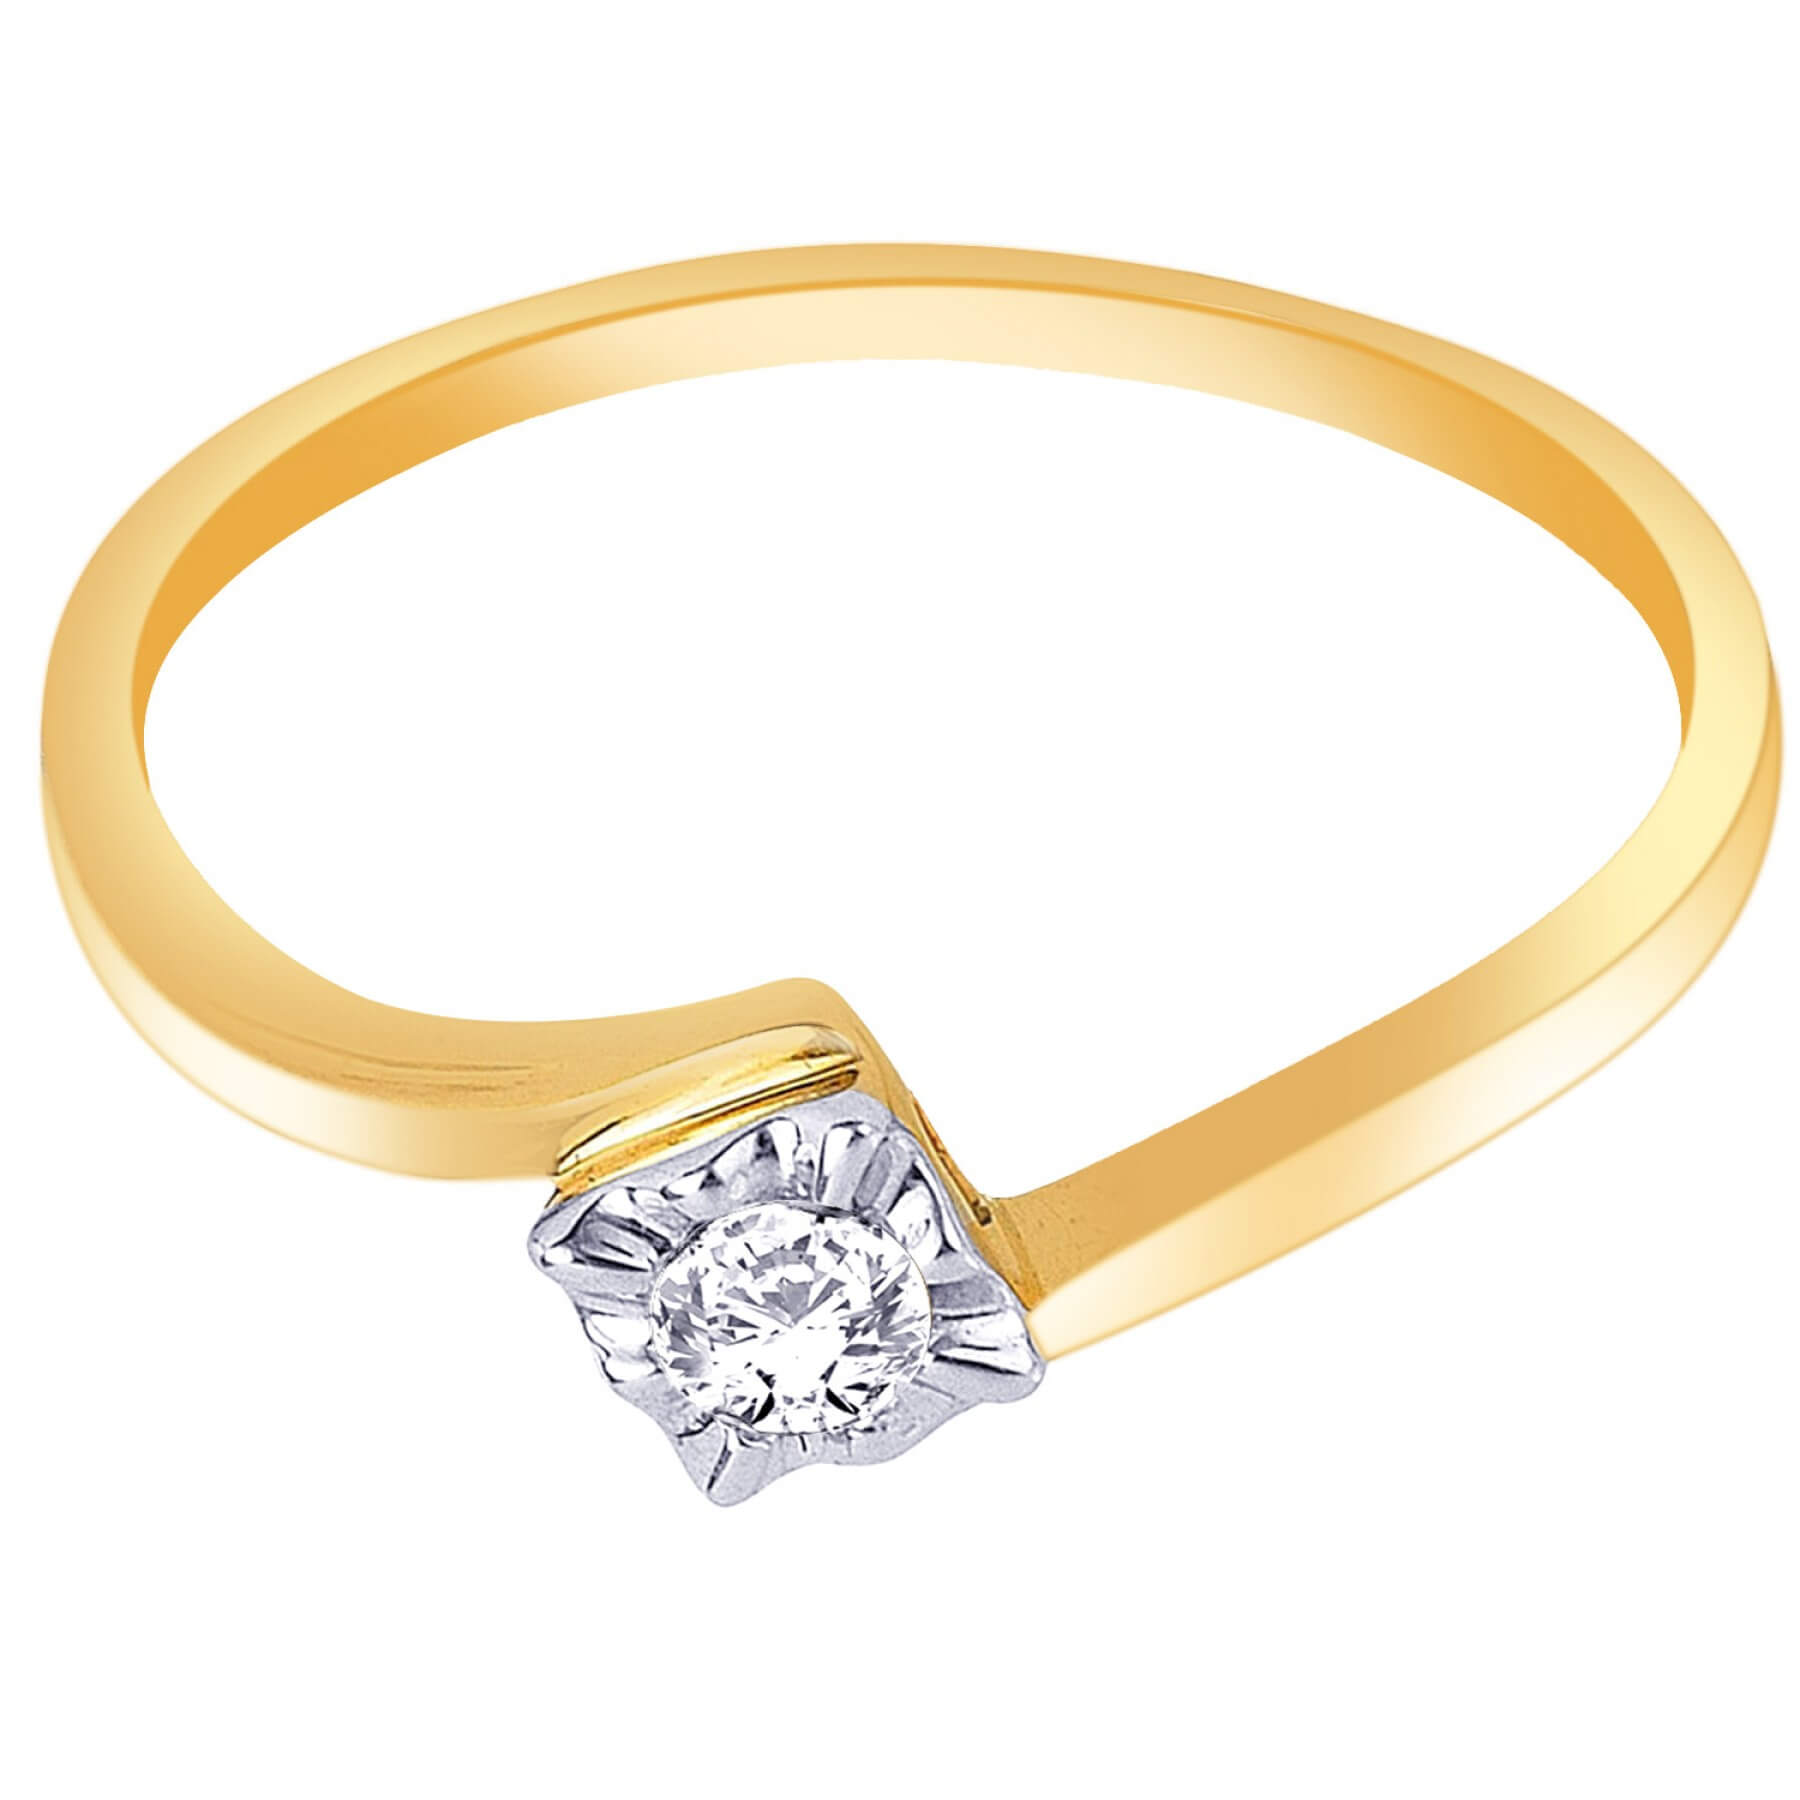 Gold Ring Designs with dimond
